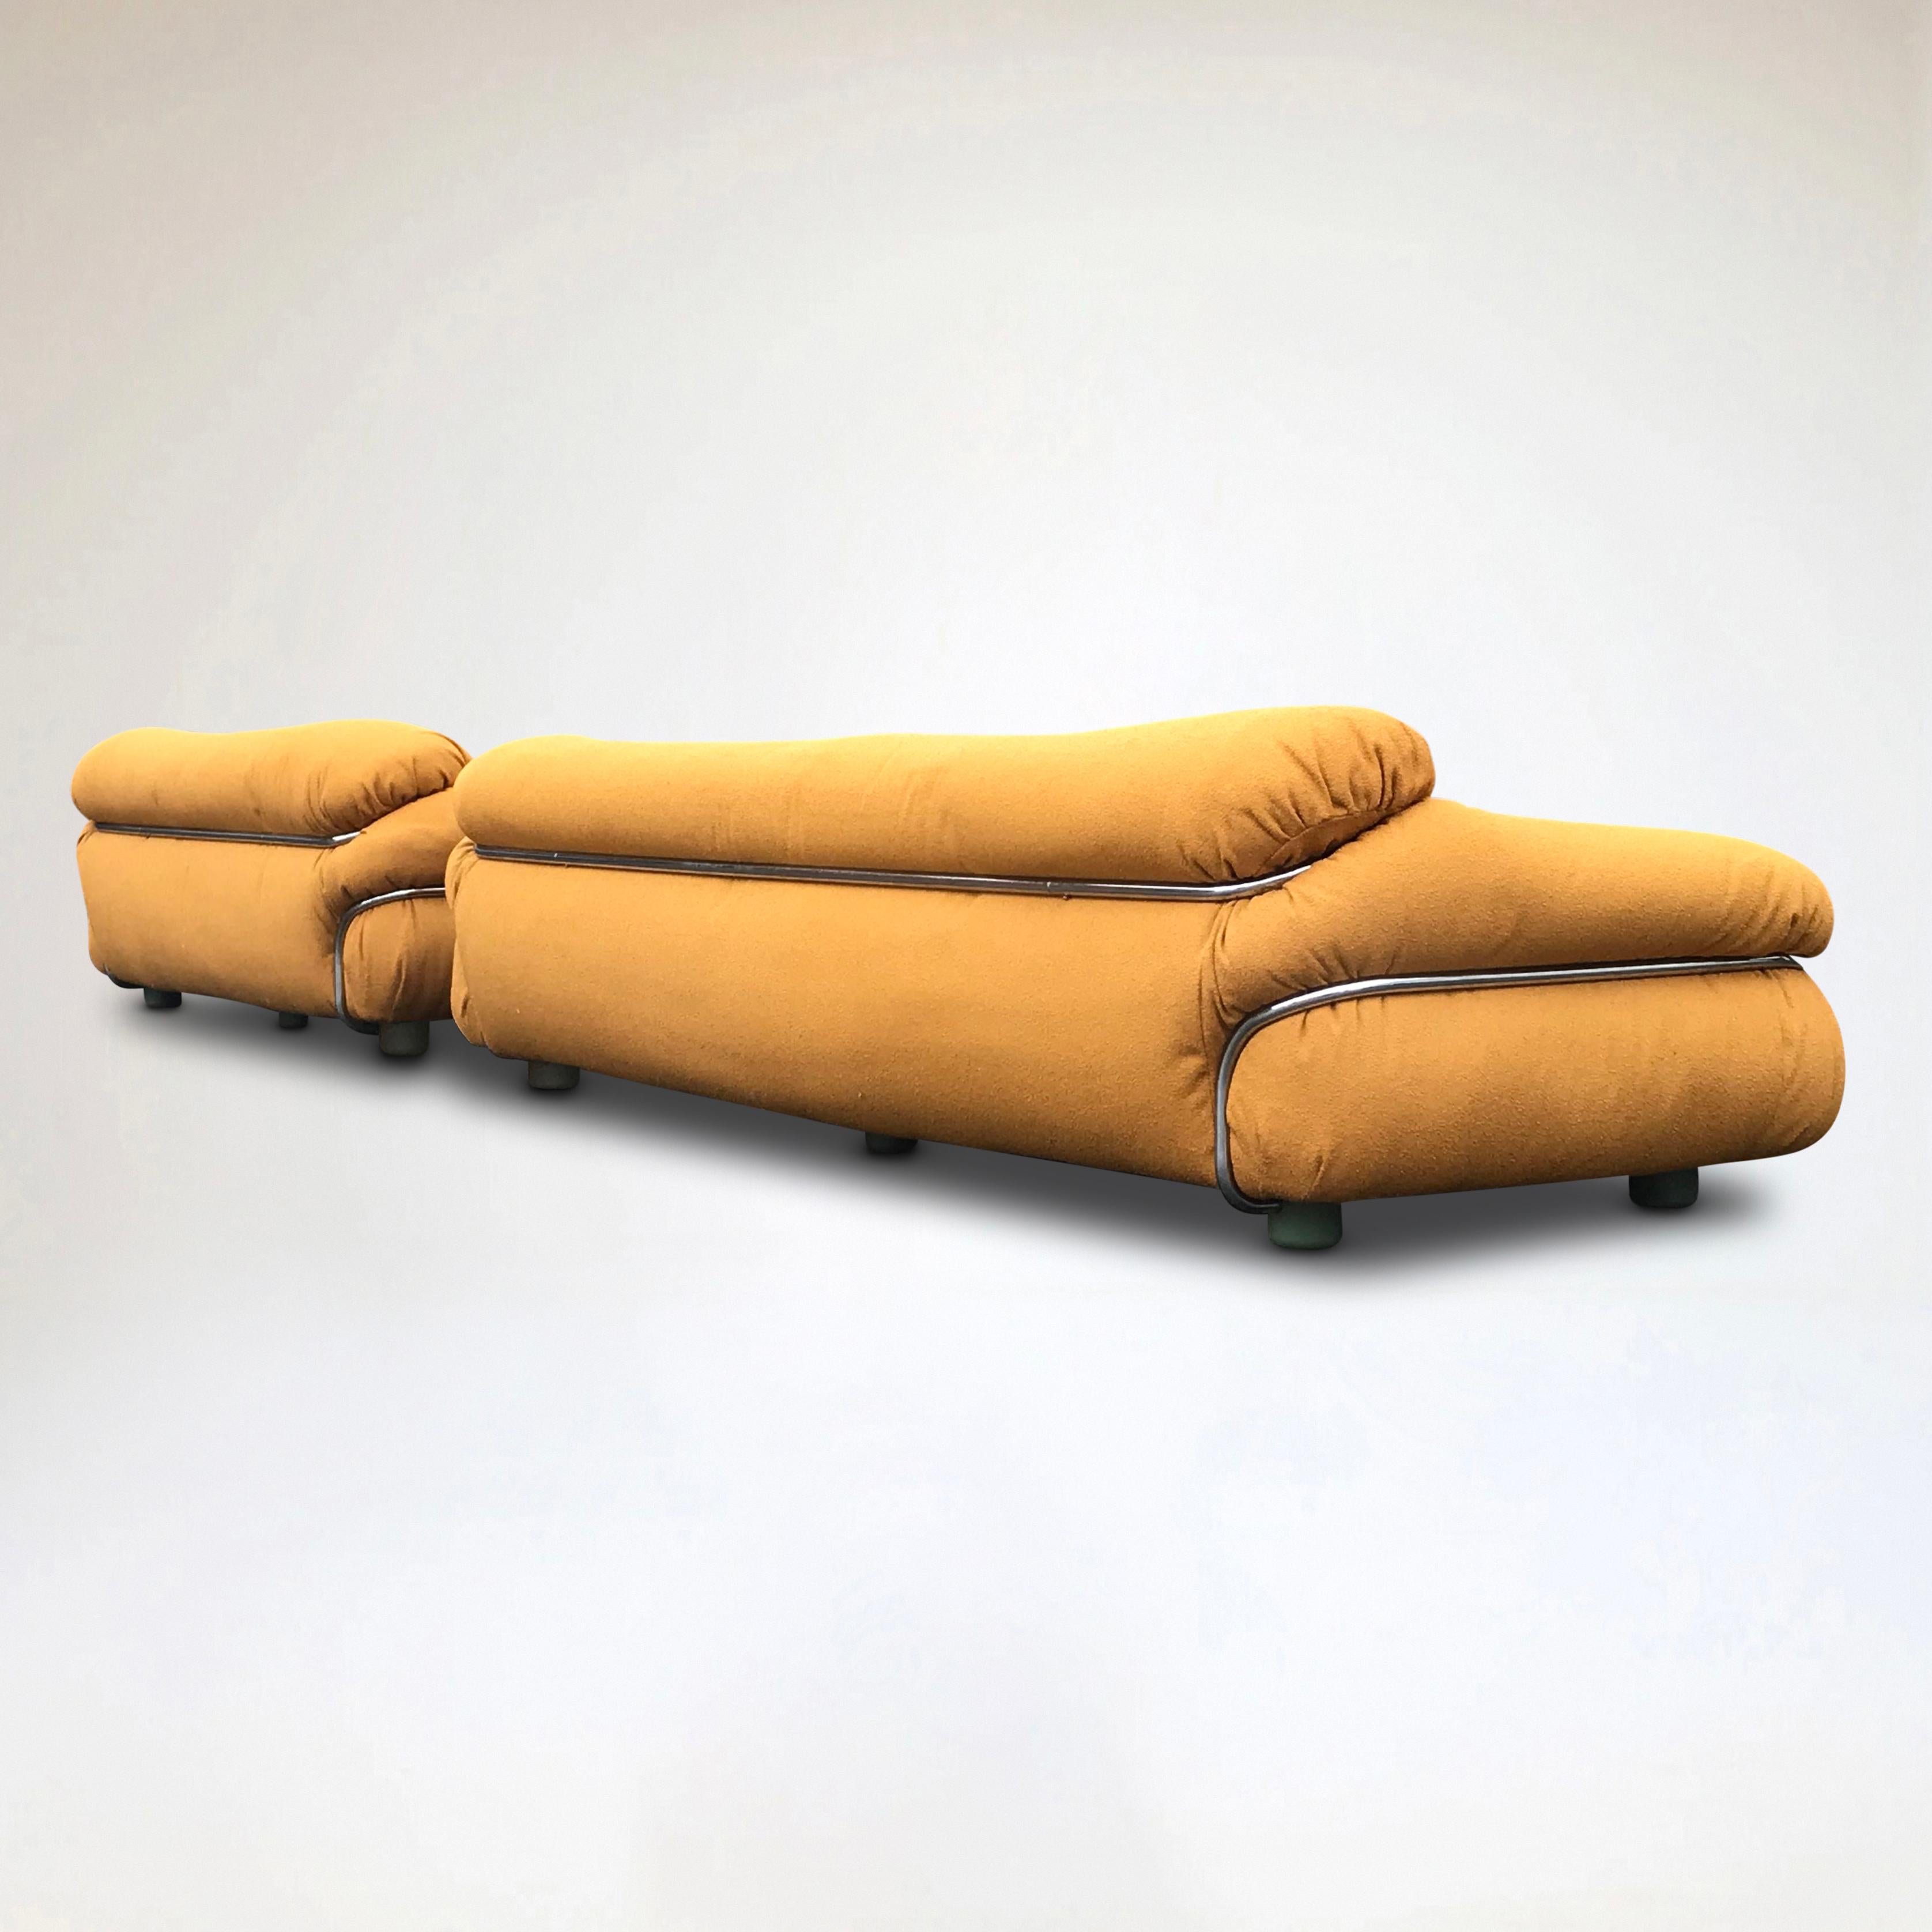 Space Age Sesann yellow bouclé sofa by Gianfranco Frattini for Cassina 1970s, set of 2 For Sale